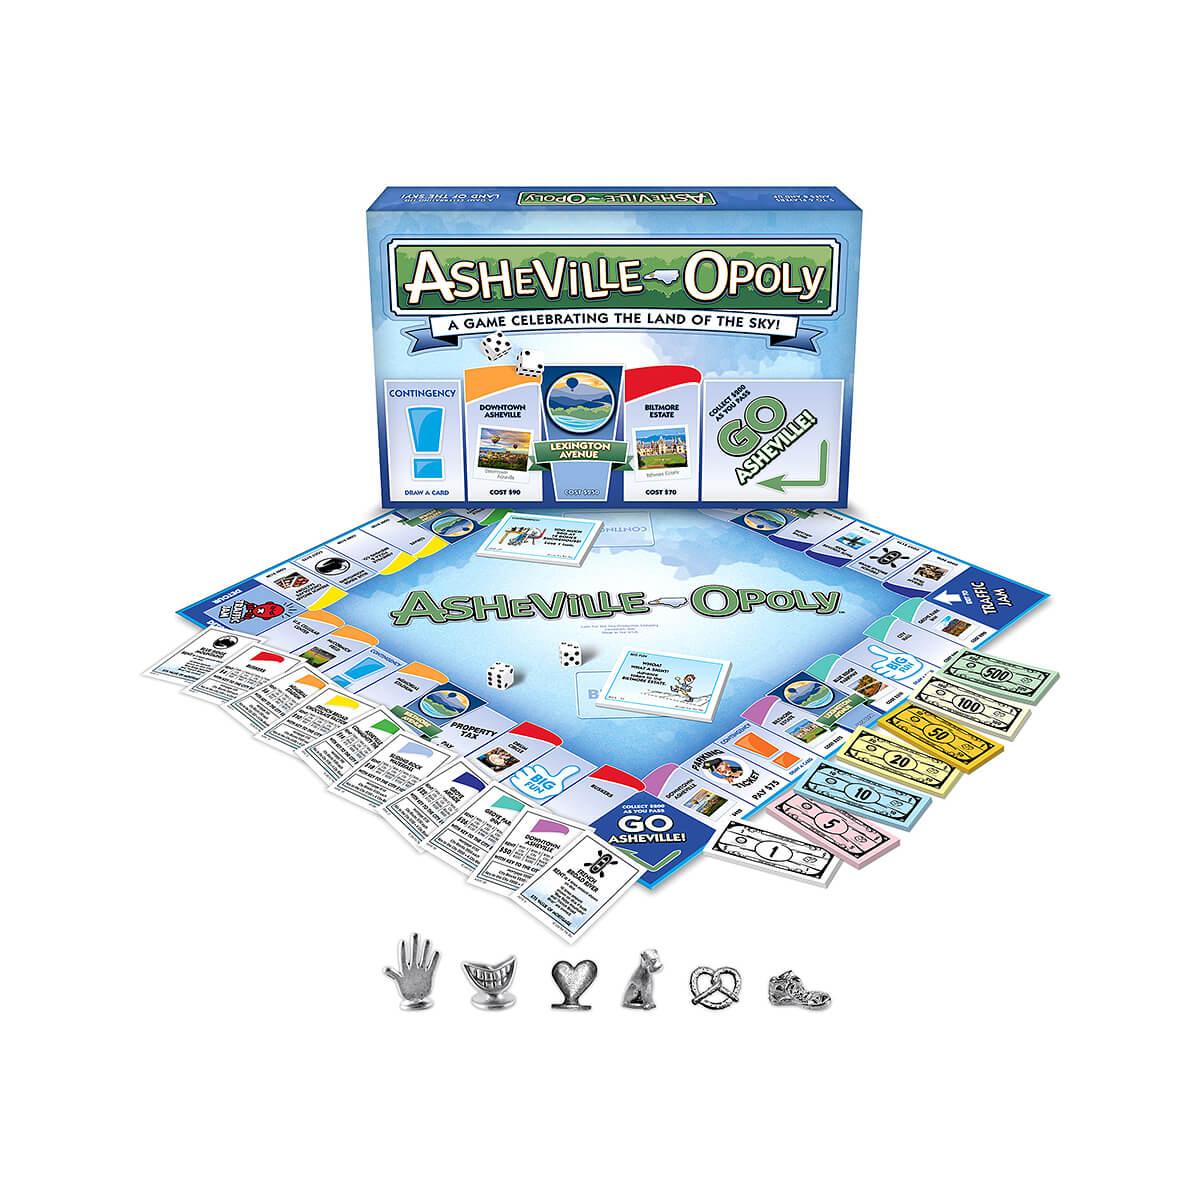  Asheville- Opoly Game